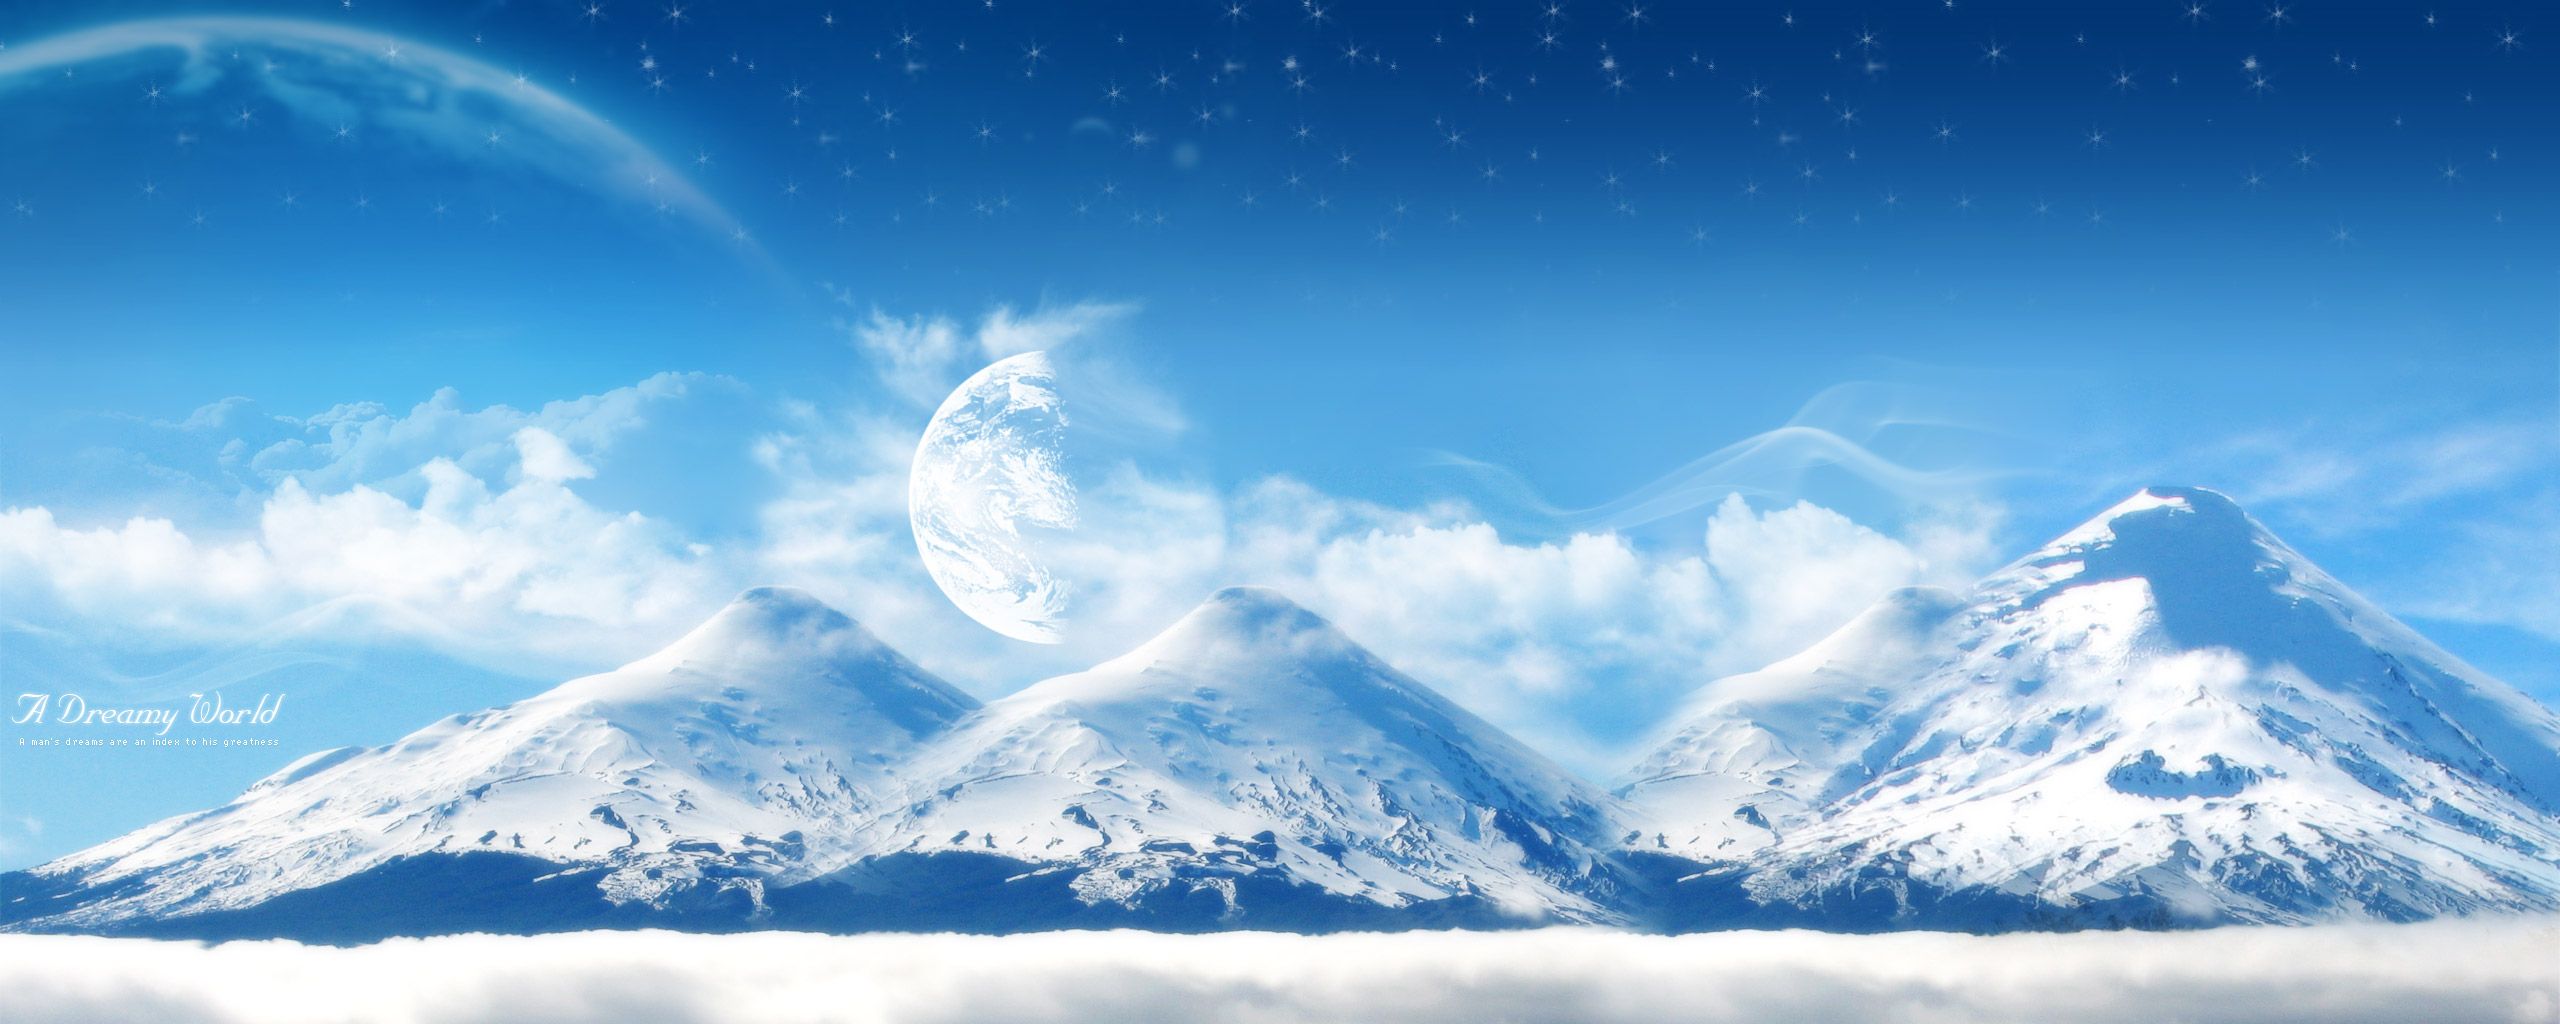 Thumbnail image for ~//images//Dual-Screen-A-Dreamy-World-Snowy-Mountain-2560x1024[1]_634256667141319885.jpg